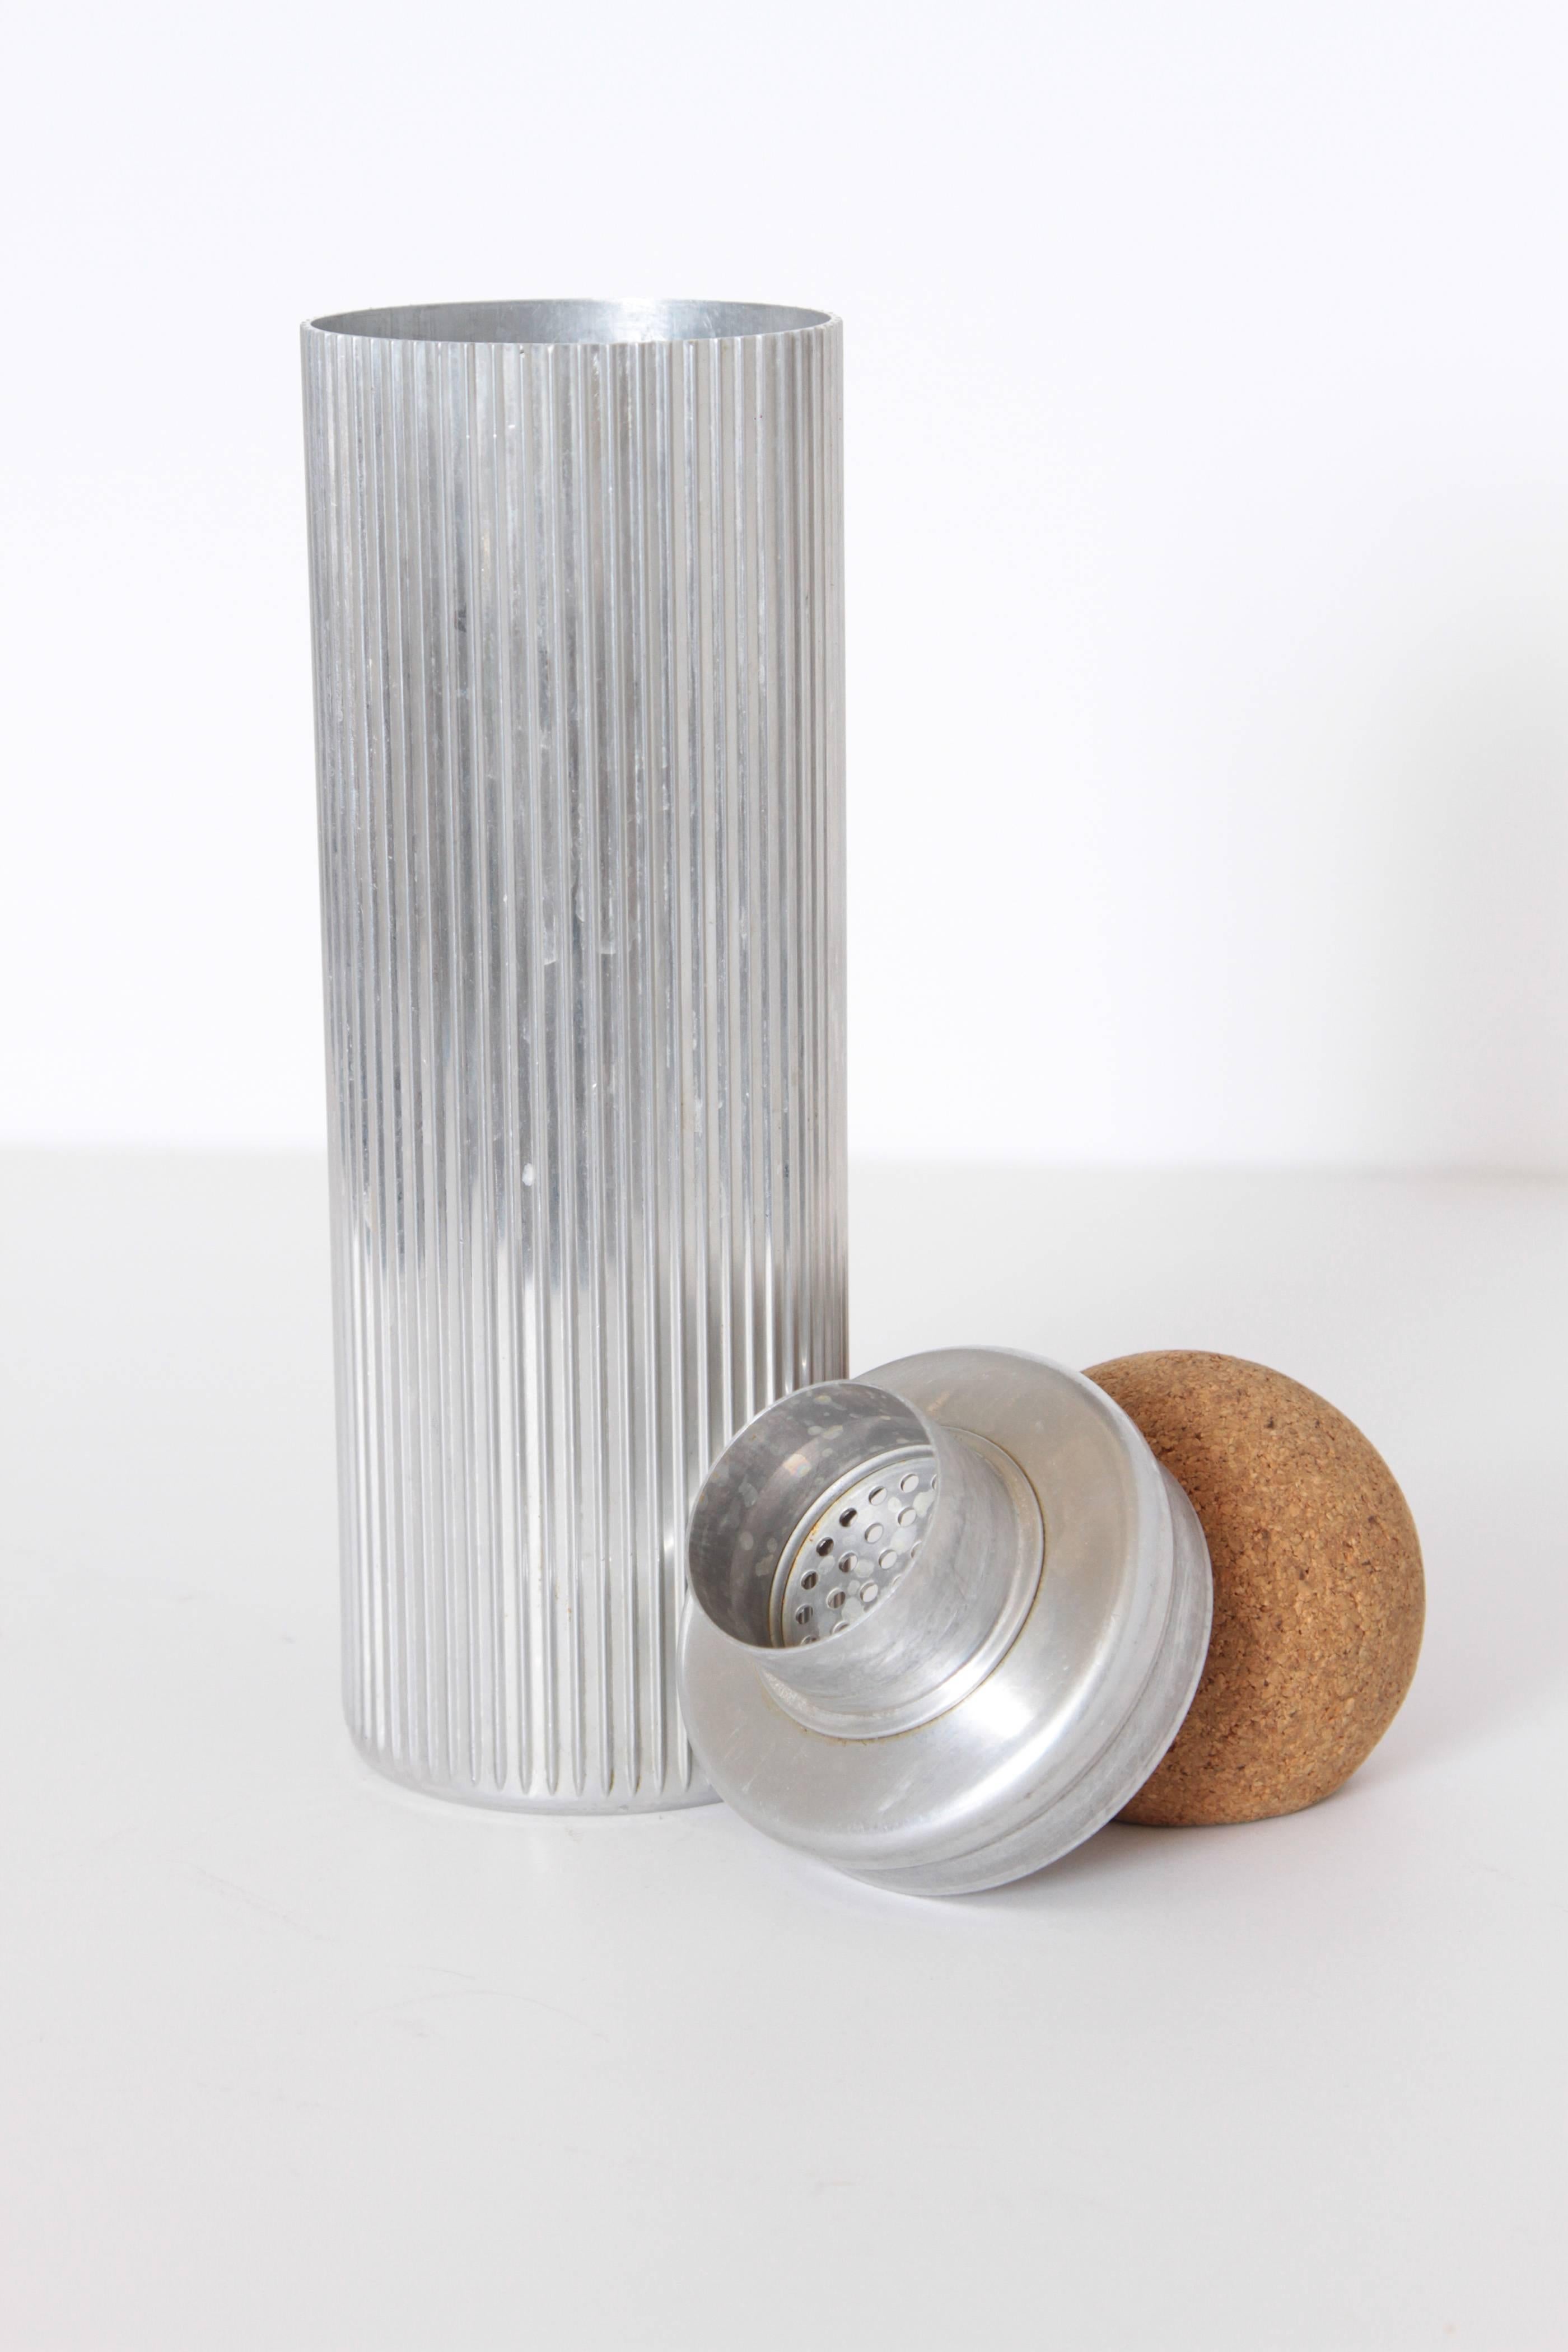 20th Century Machine Age Art Deco Ribbed Cocktail Shaker Aluminum / Cork, after Russel Wright